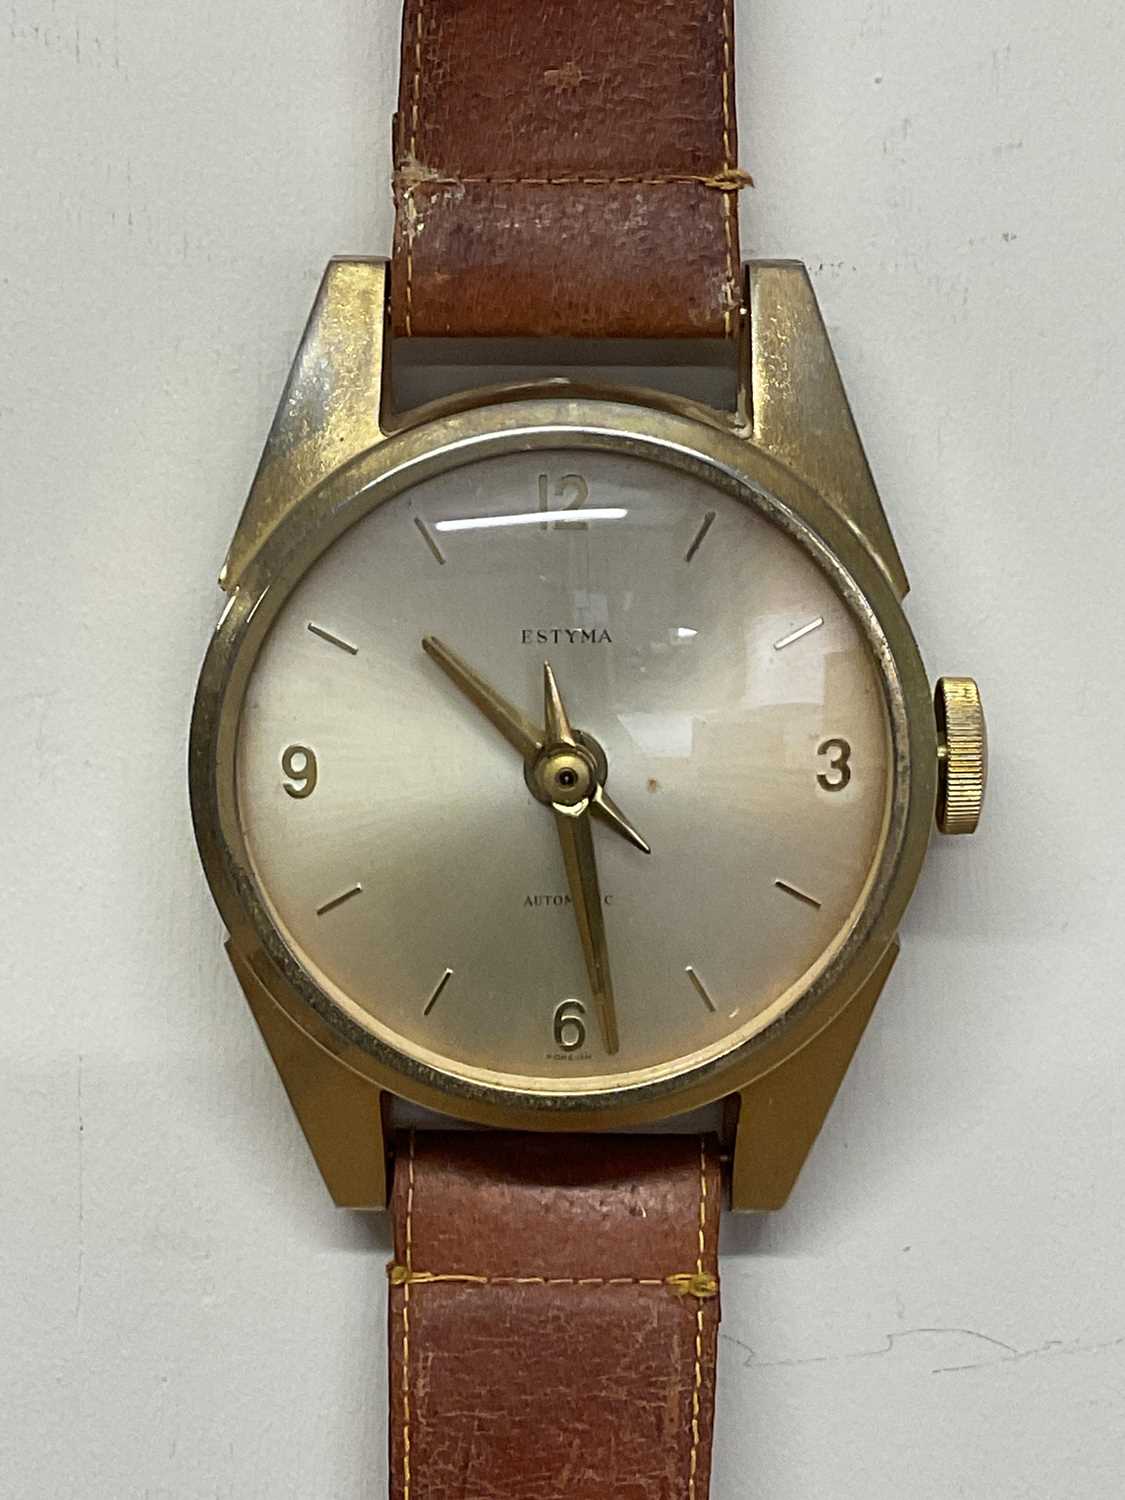 ESTYMA; a wall clock styled as a wristwatch on leather strap, height 78cm, width 12cm